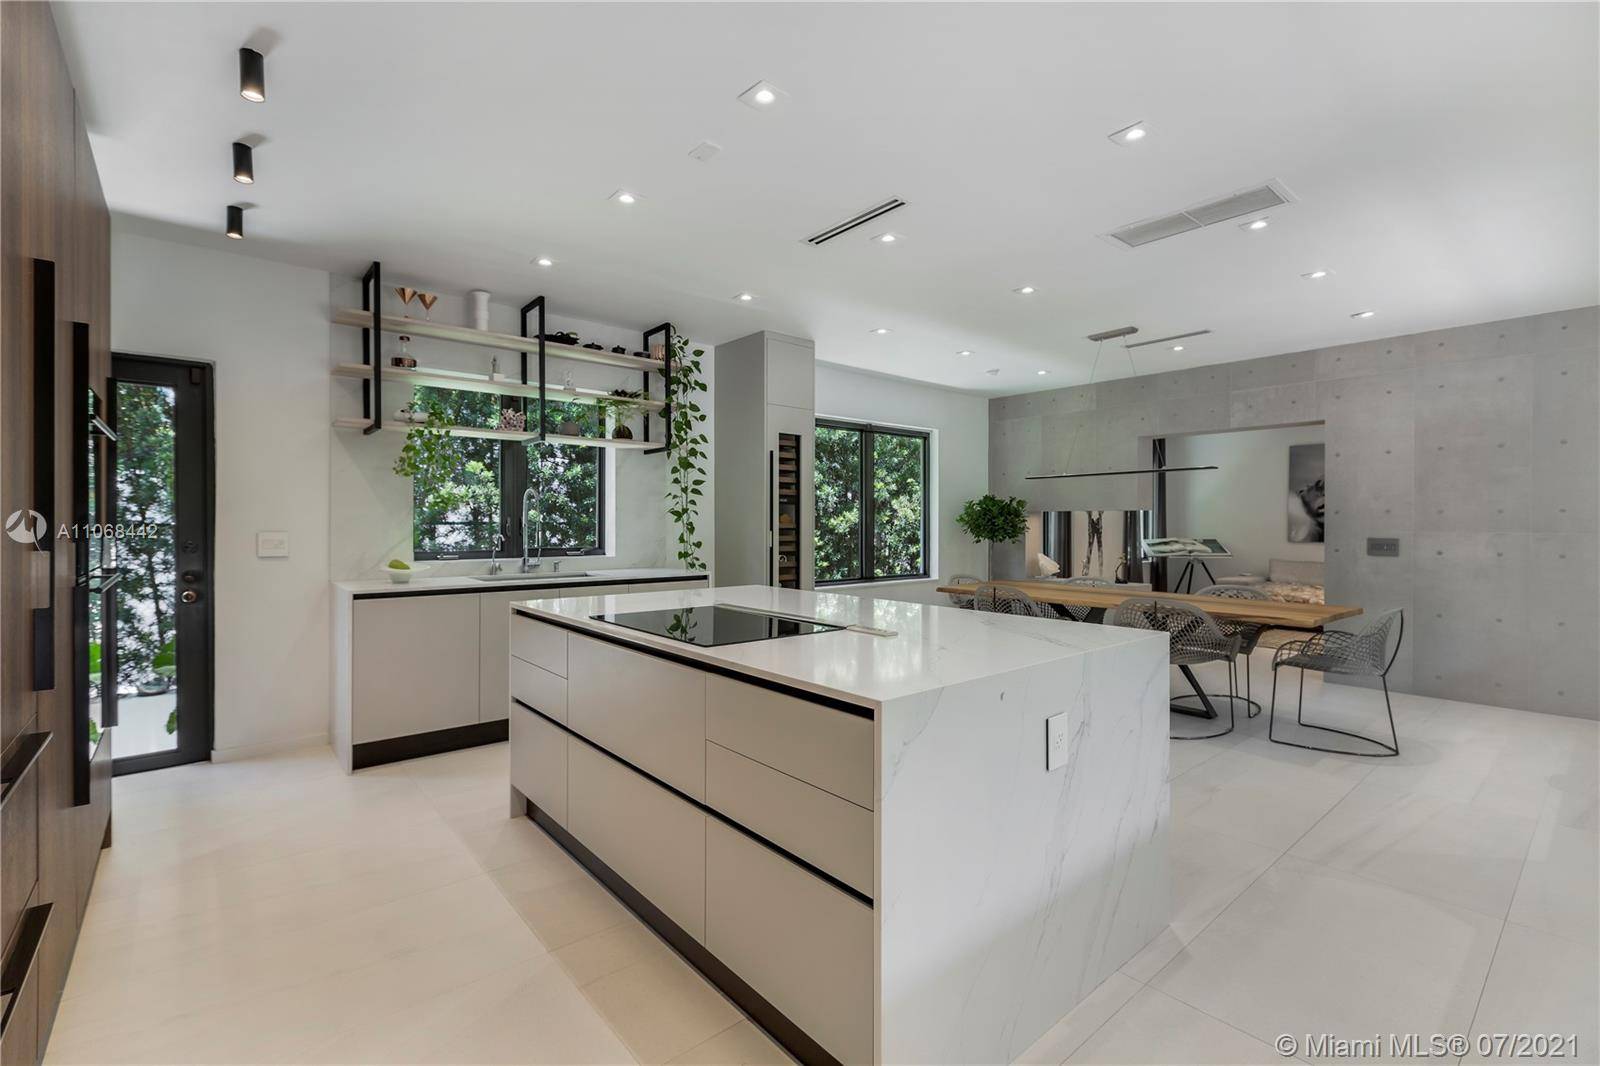 Unique, stylish house in a beautiful, lush, dream neighborhood in the middle of Miami Beach.